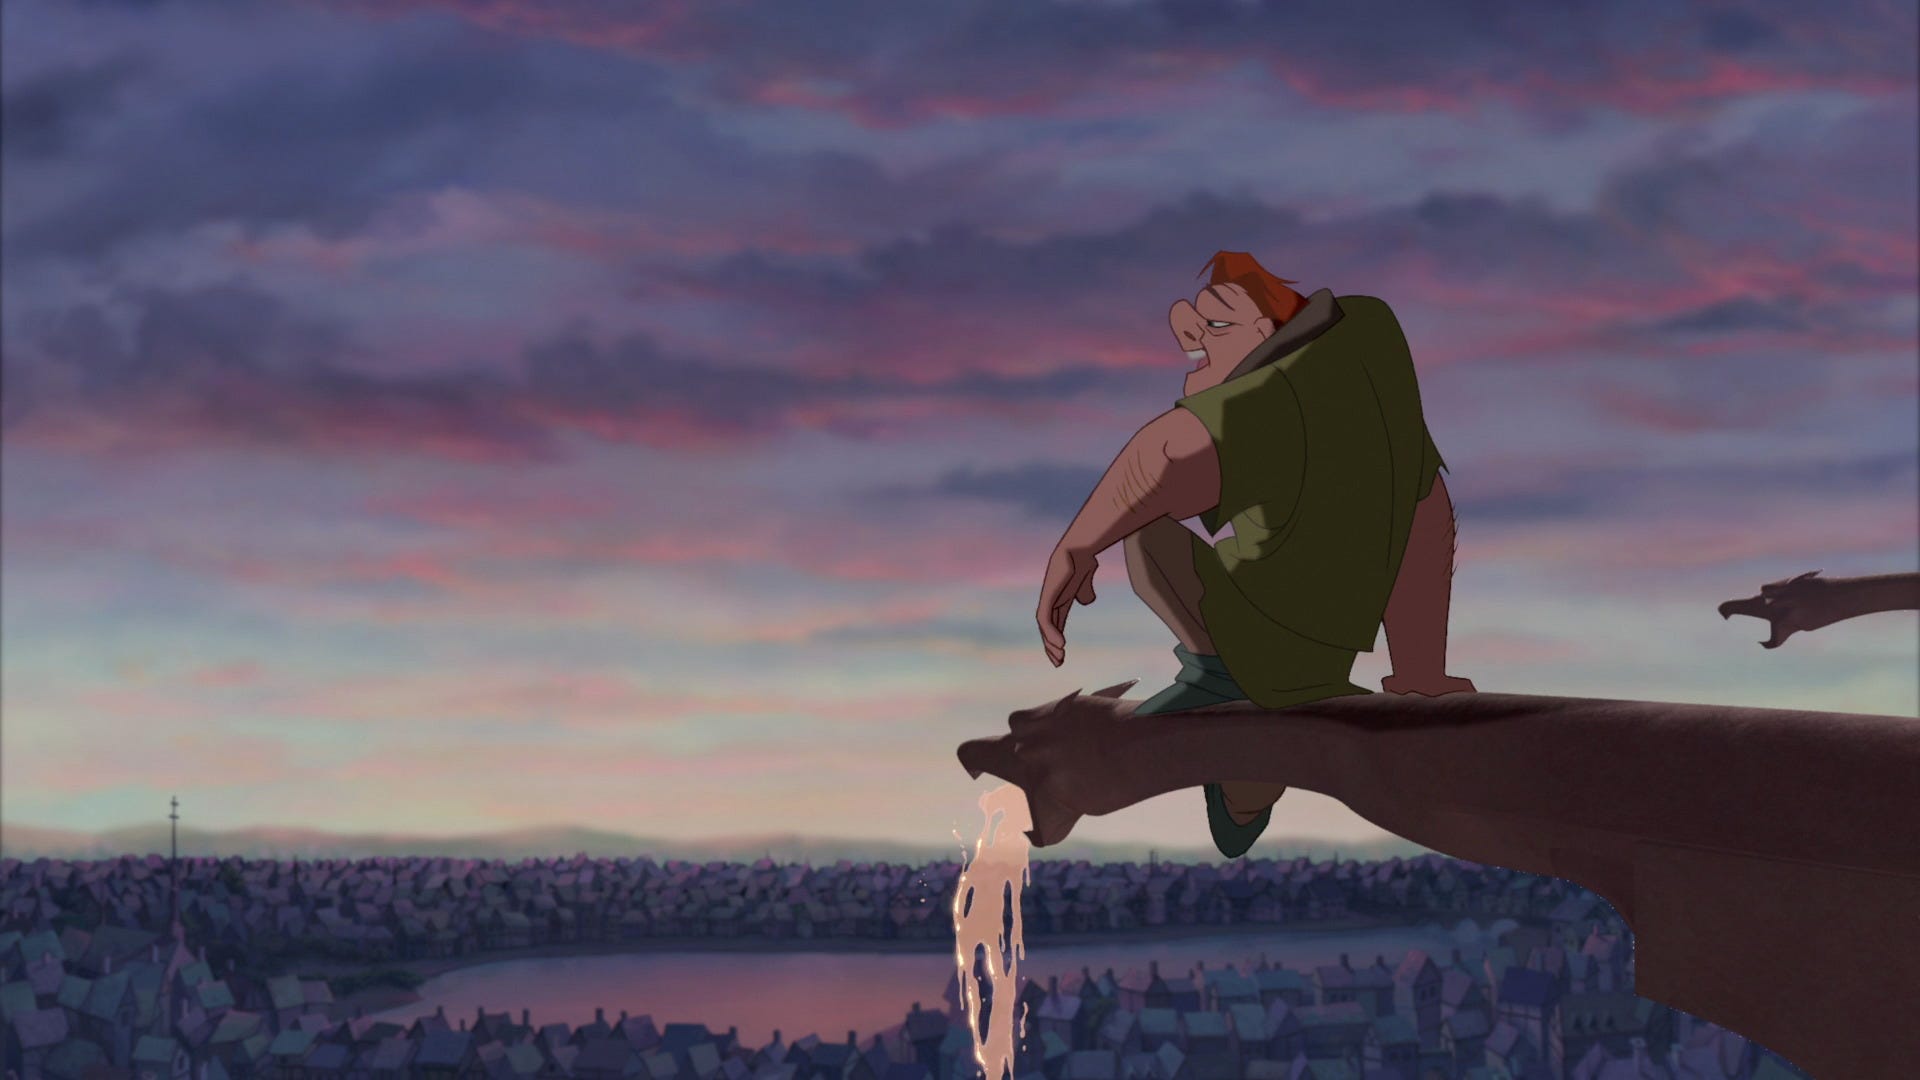 Why ‘The Hunchback of Notre Dame’ is one of Disney’s greatest